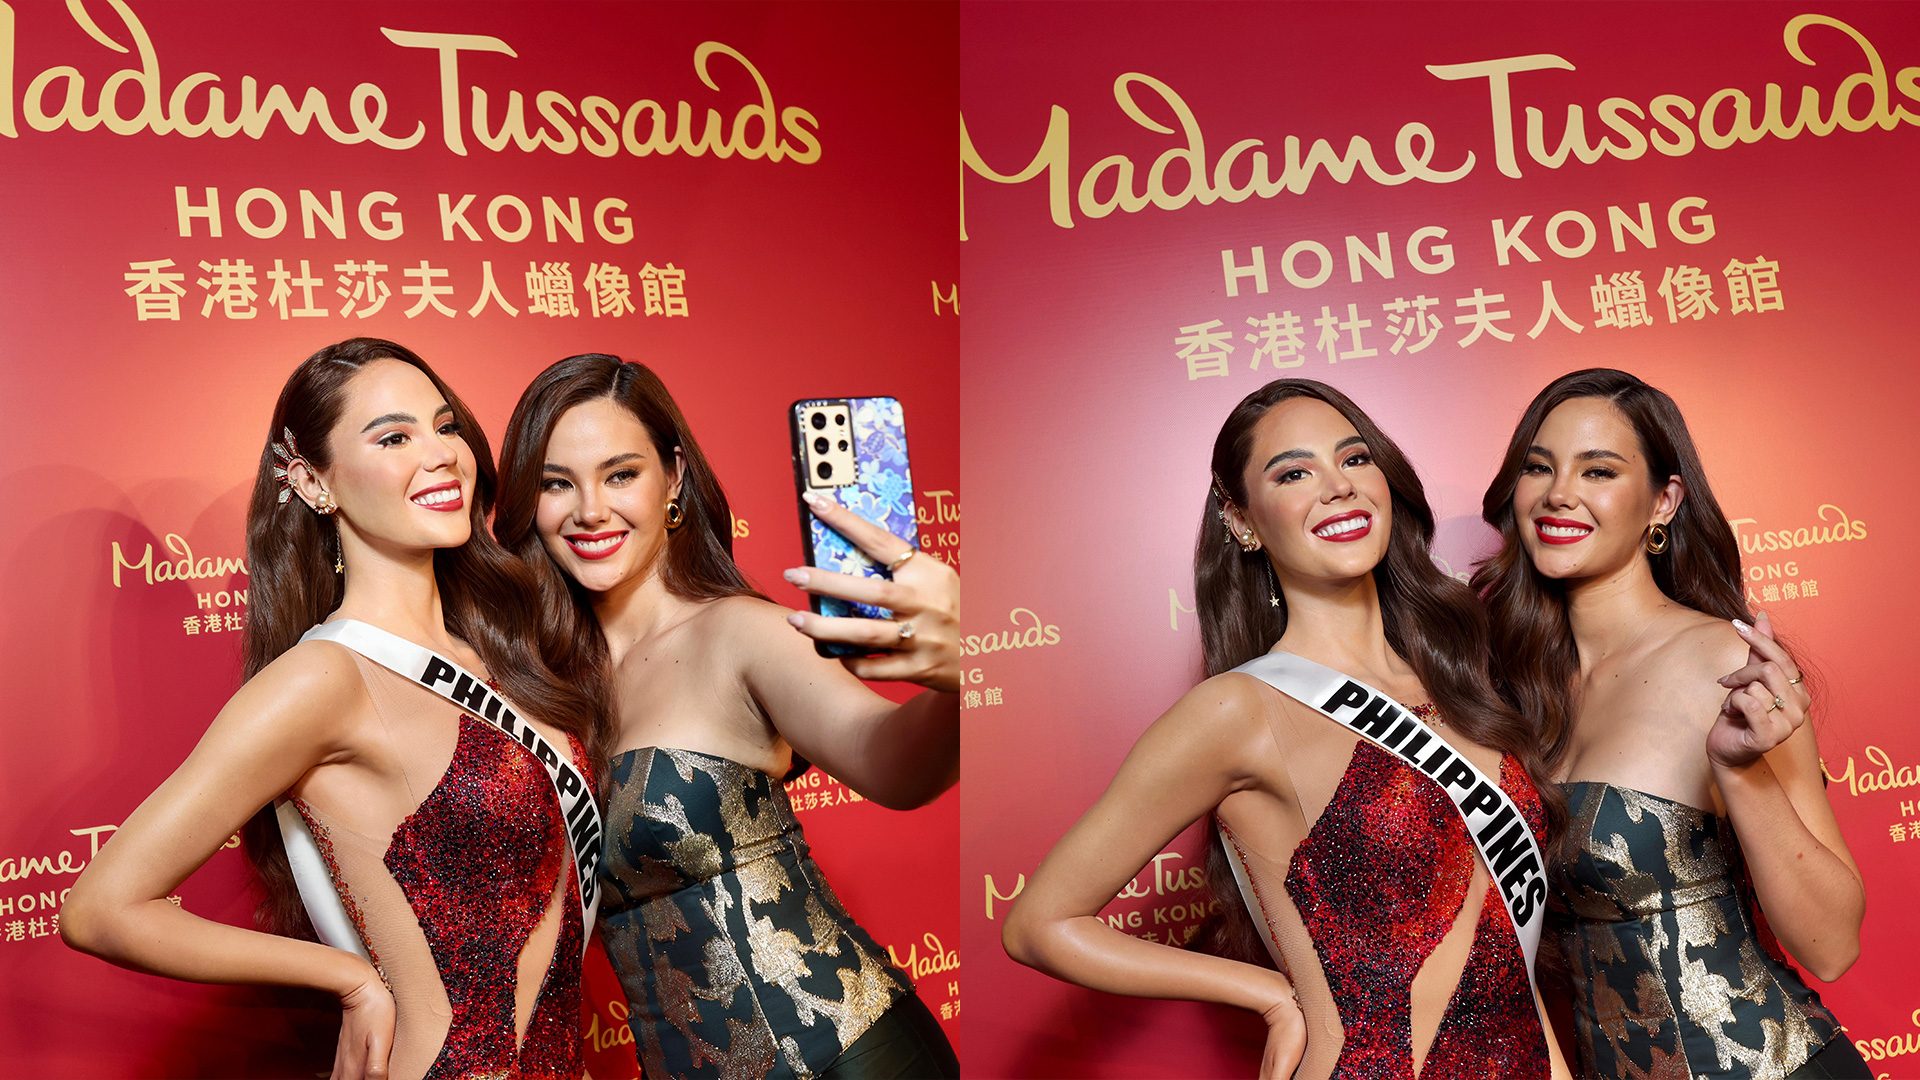 Miss Universe 2018 Catriona Gray’s wax figure now in Madame Tussauds Hong Kong